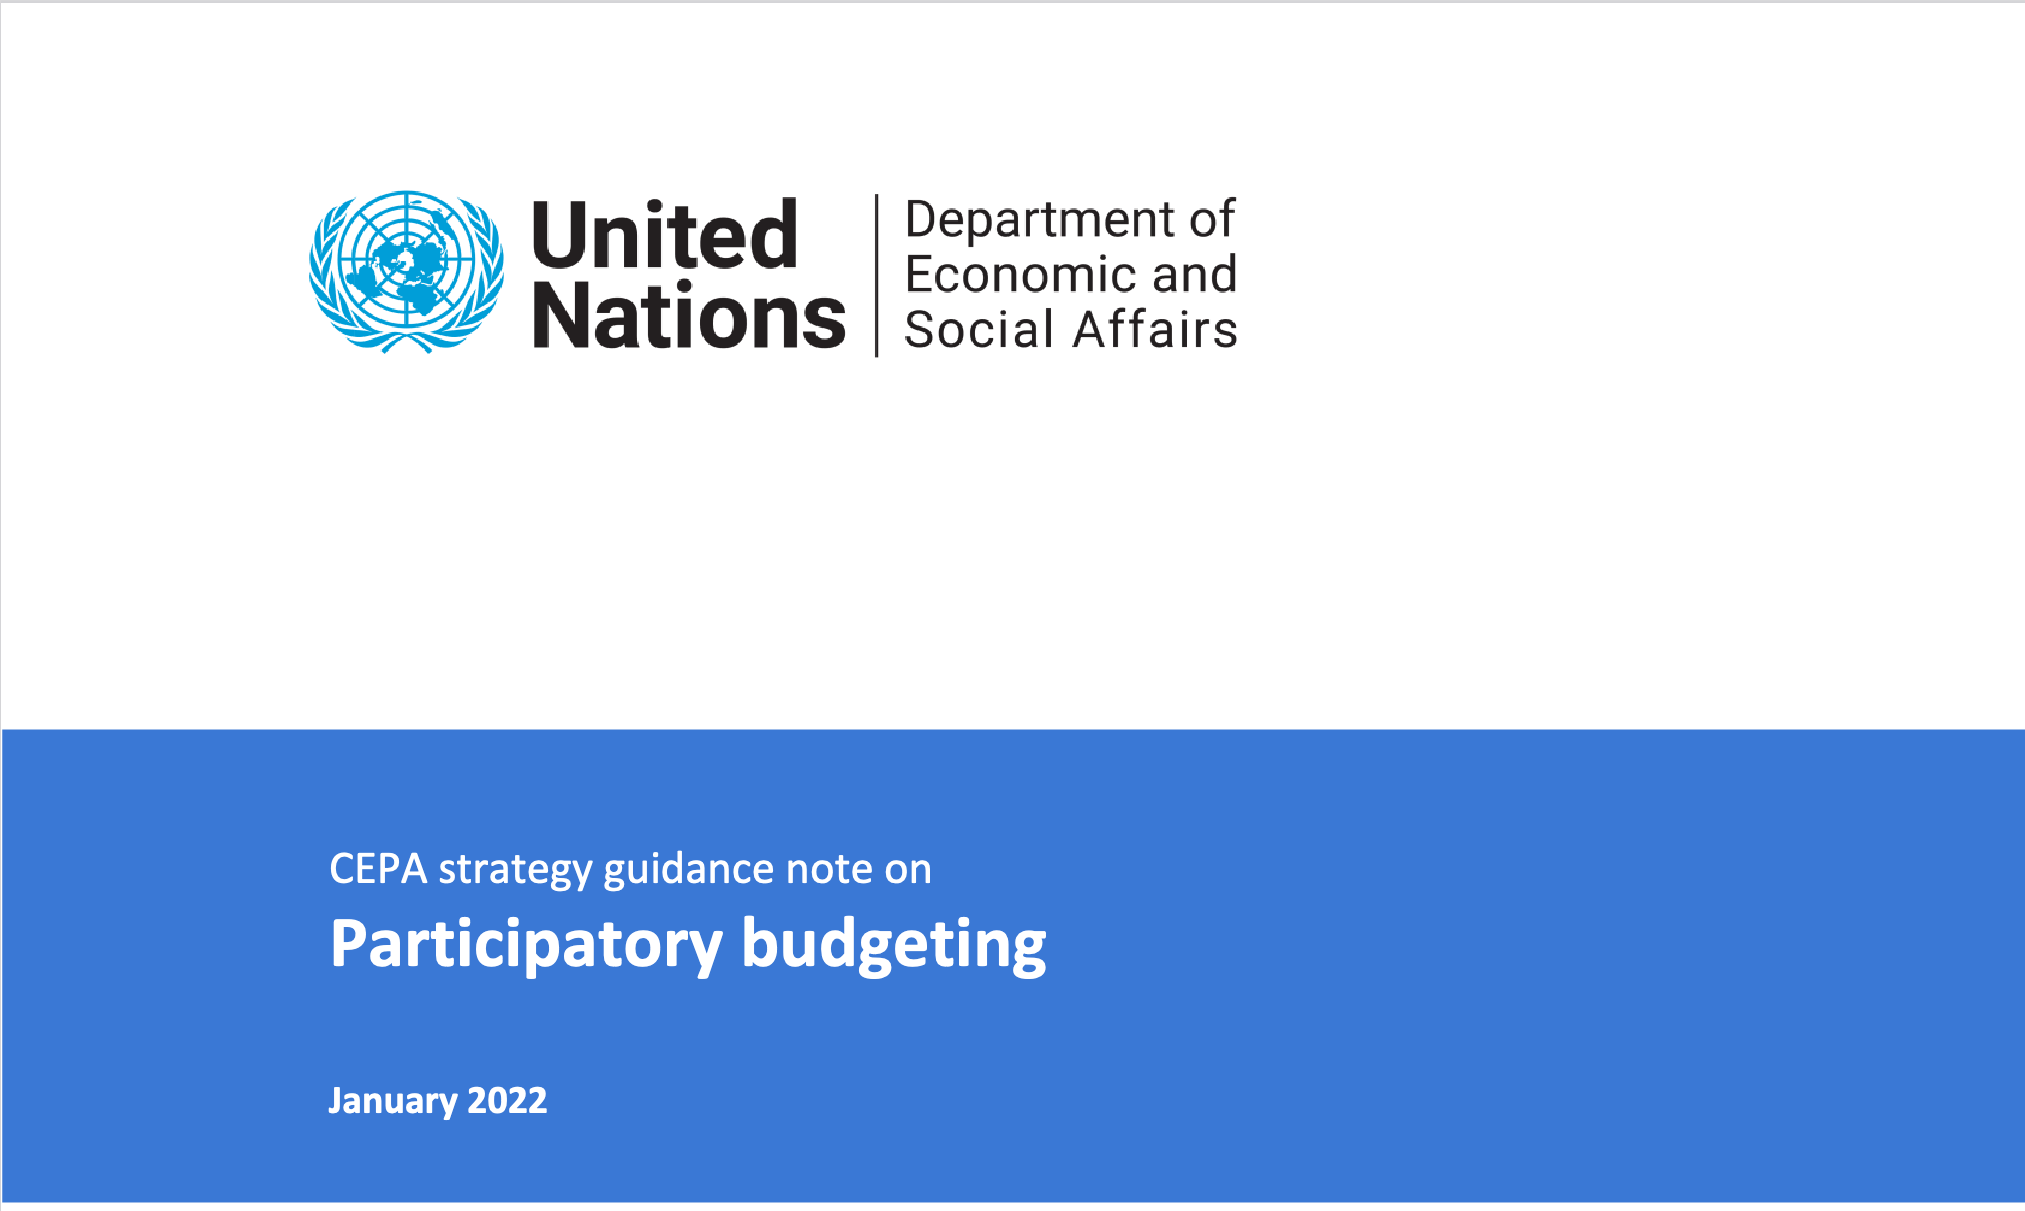 CEPA strategy guidance note on participatory budgeting